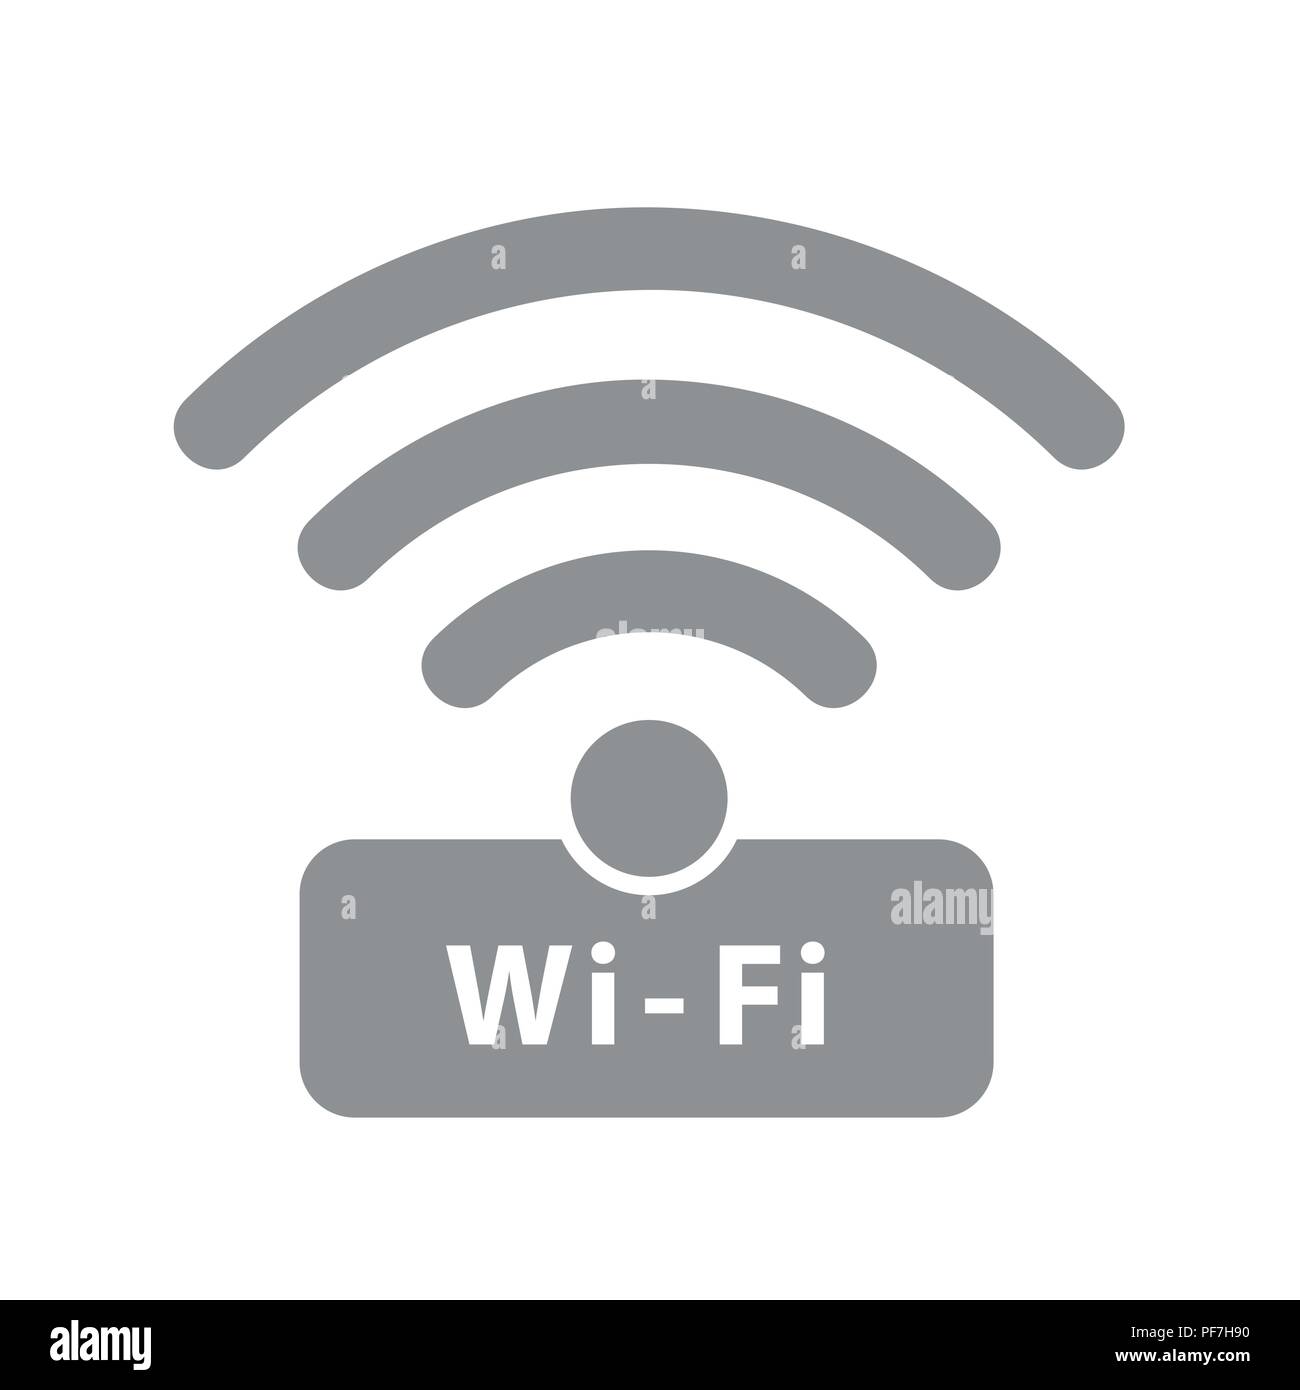 free Wi-Fi symbol connecting grey vector illustration EPS10 Stock Vector